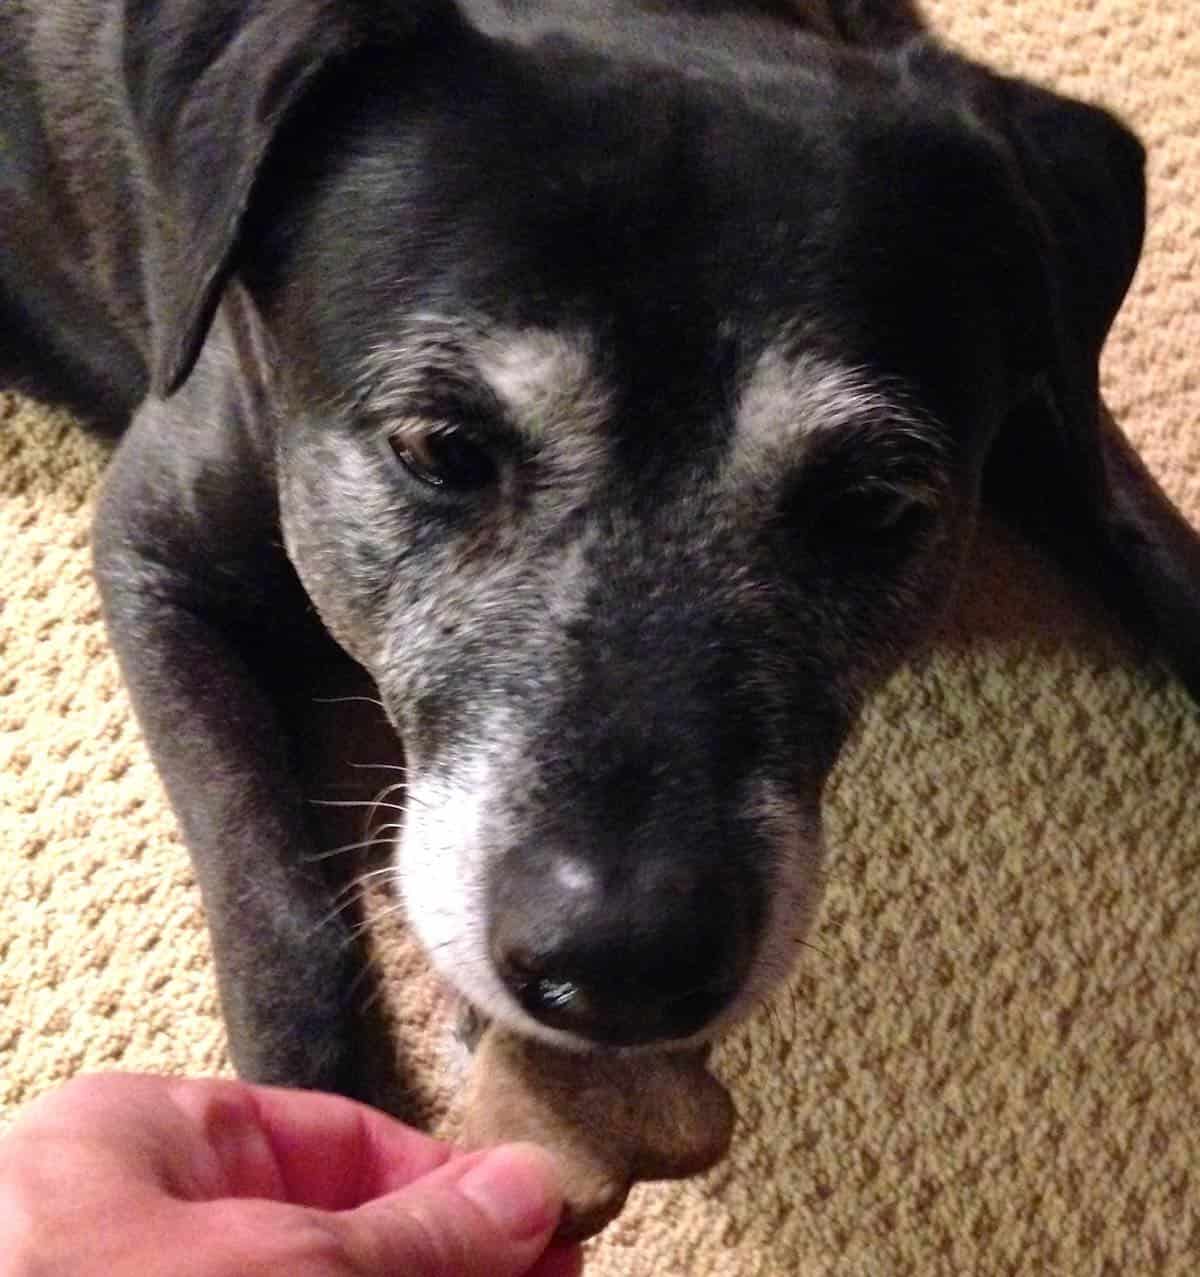 A gift of heart-shaped grain-free dog biscuits is a treat for my dog.